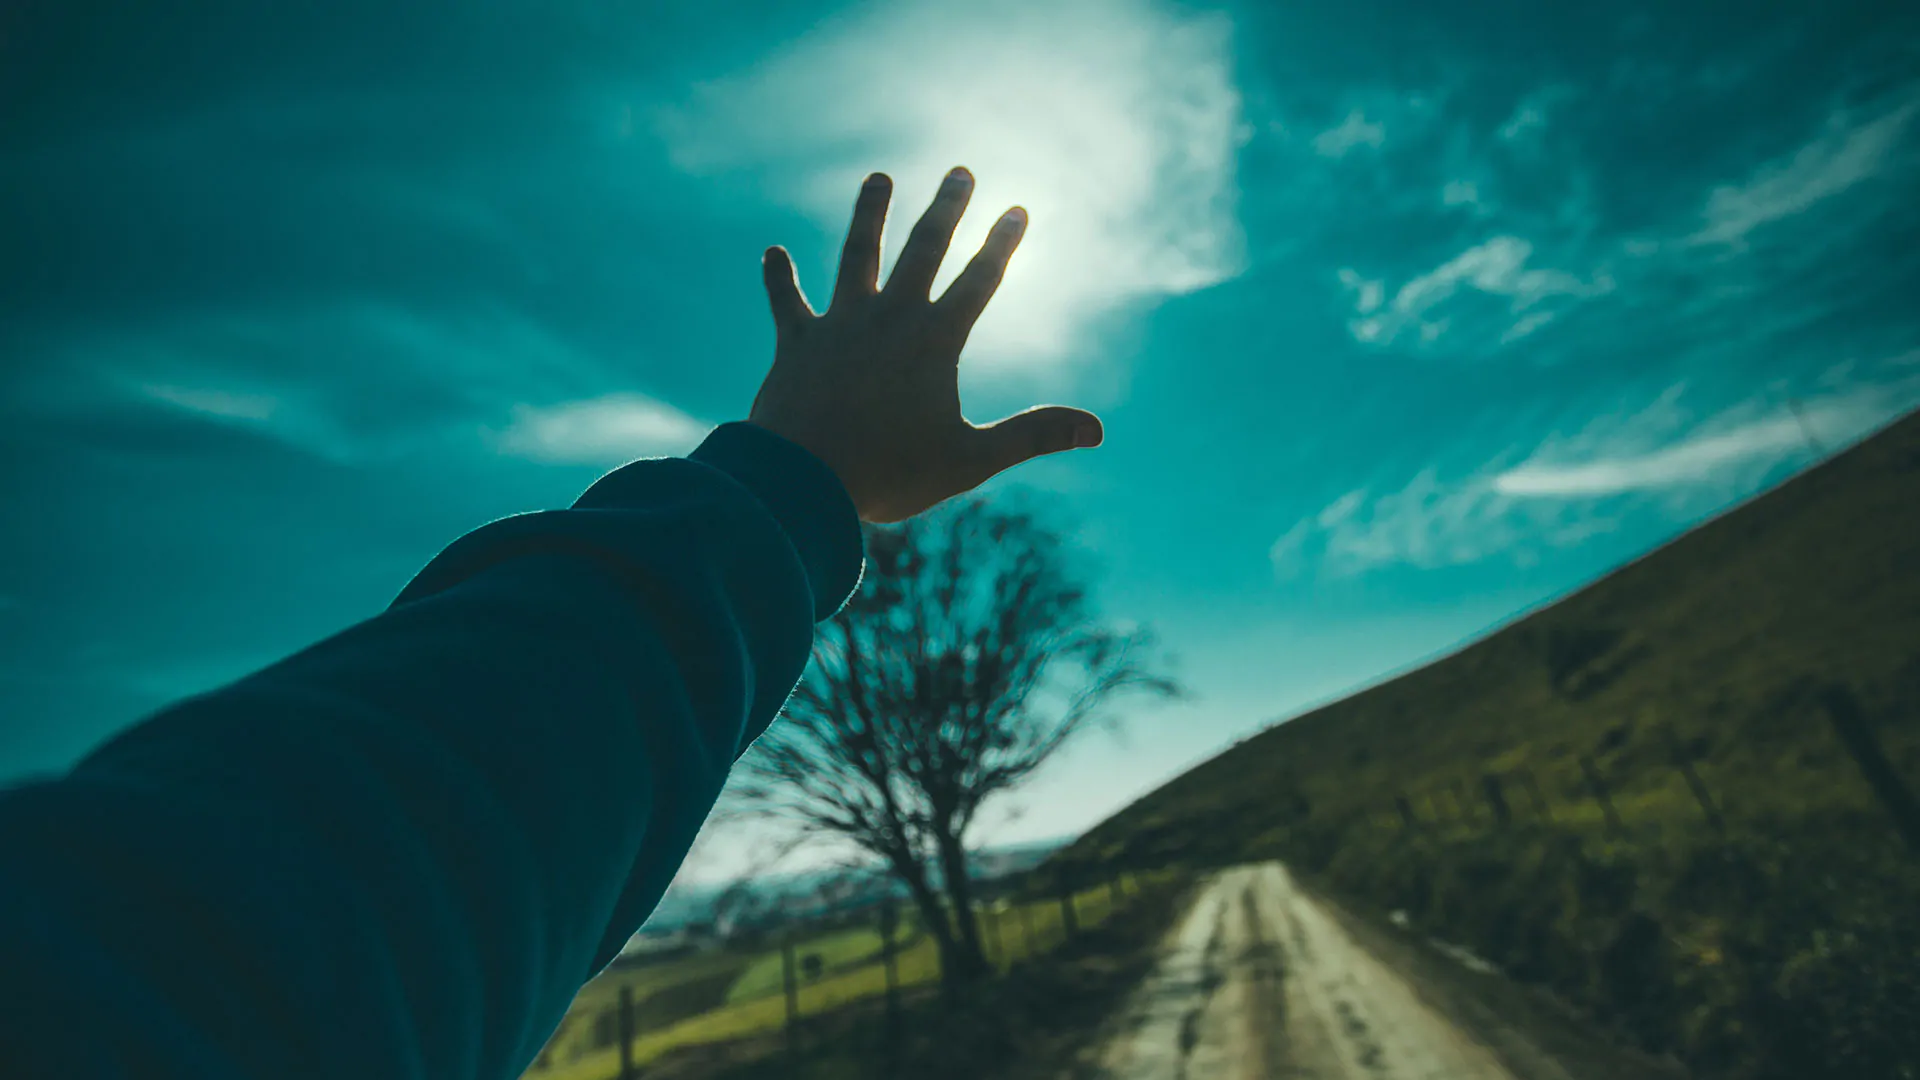 A person's hand reaching up to the sky on a dirt road, signaling the pioneering spirit of a marketing agency.